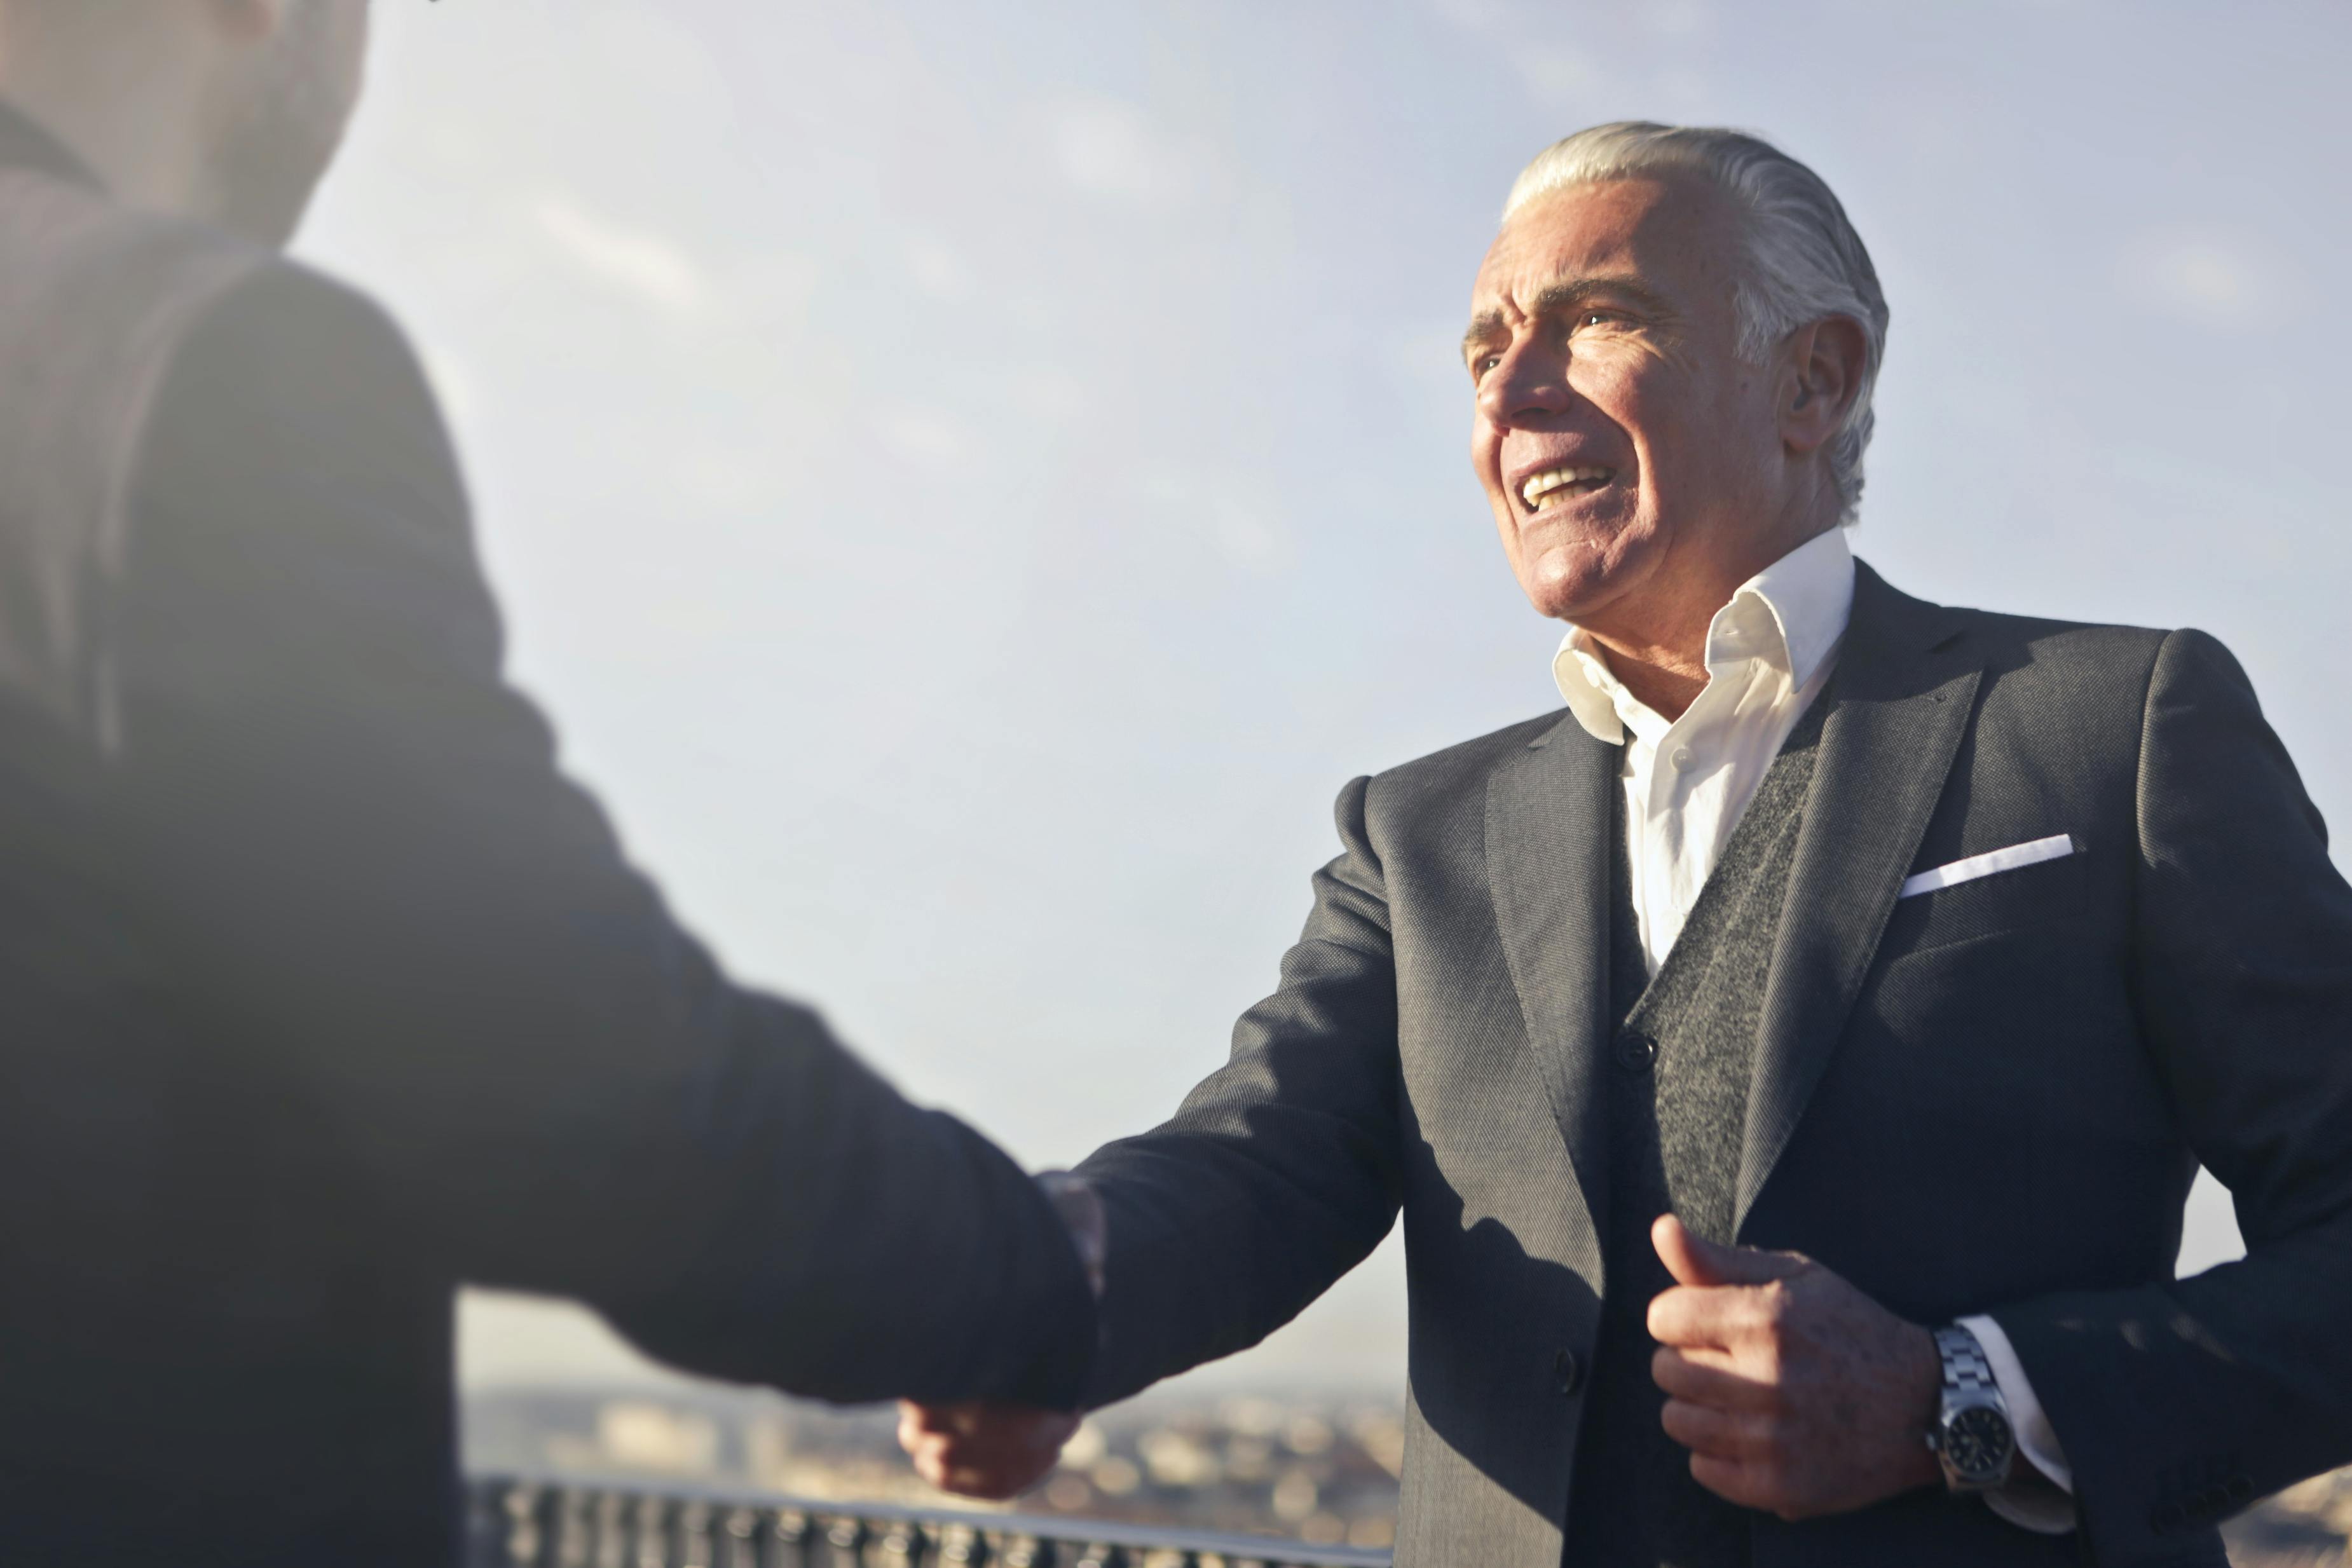 Two men shake hands in introduction  | Source: Pexels